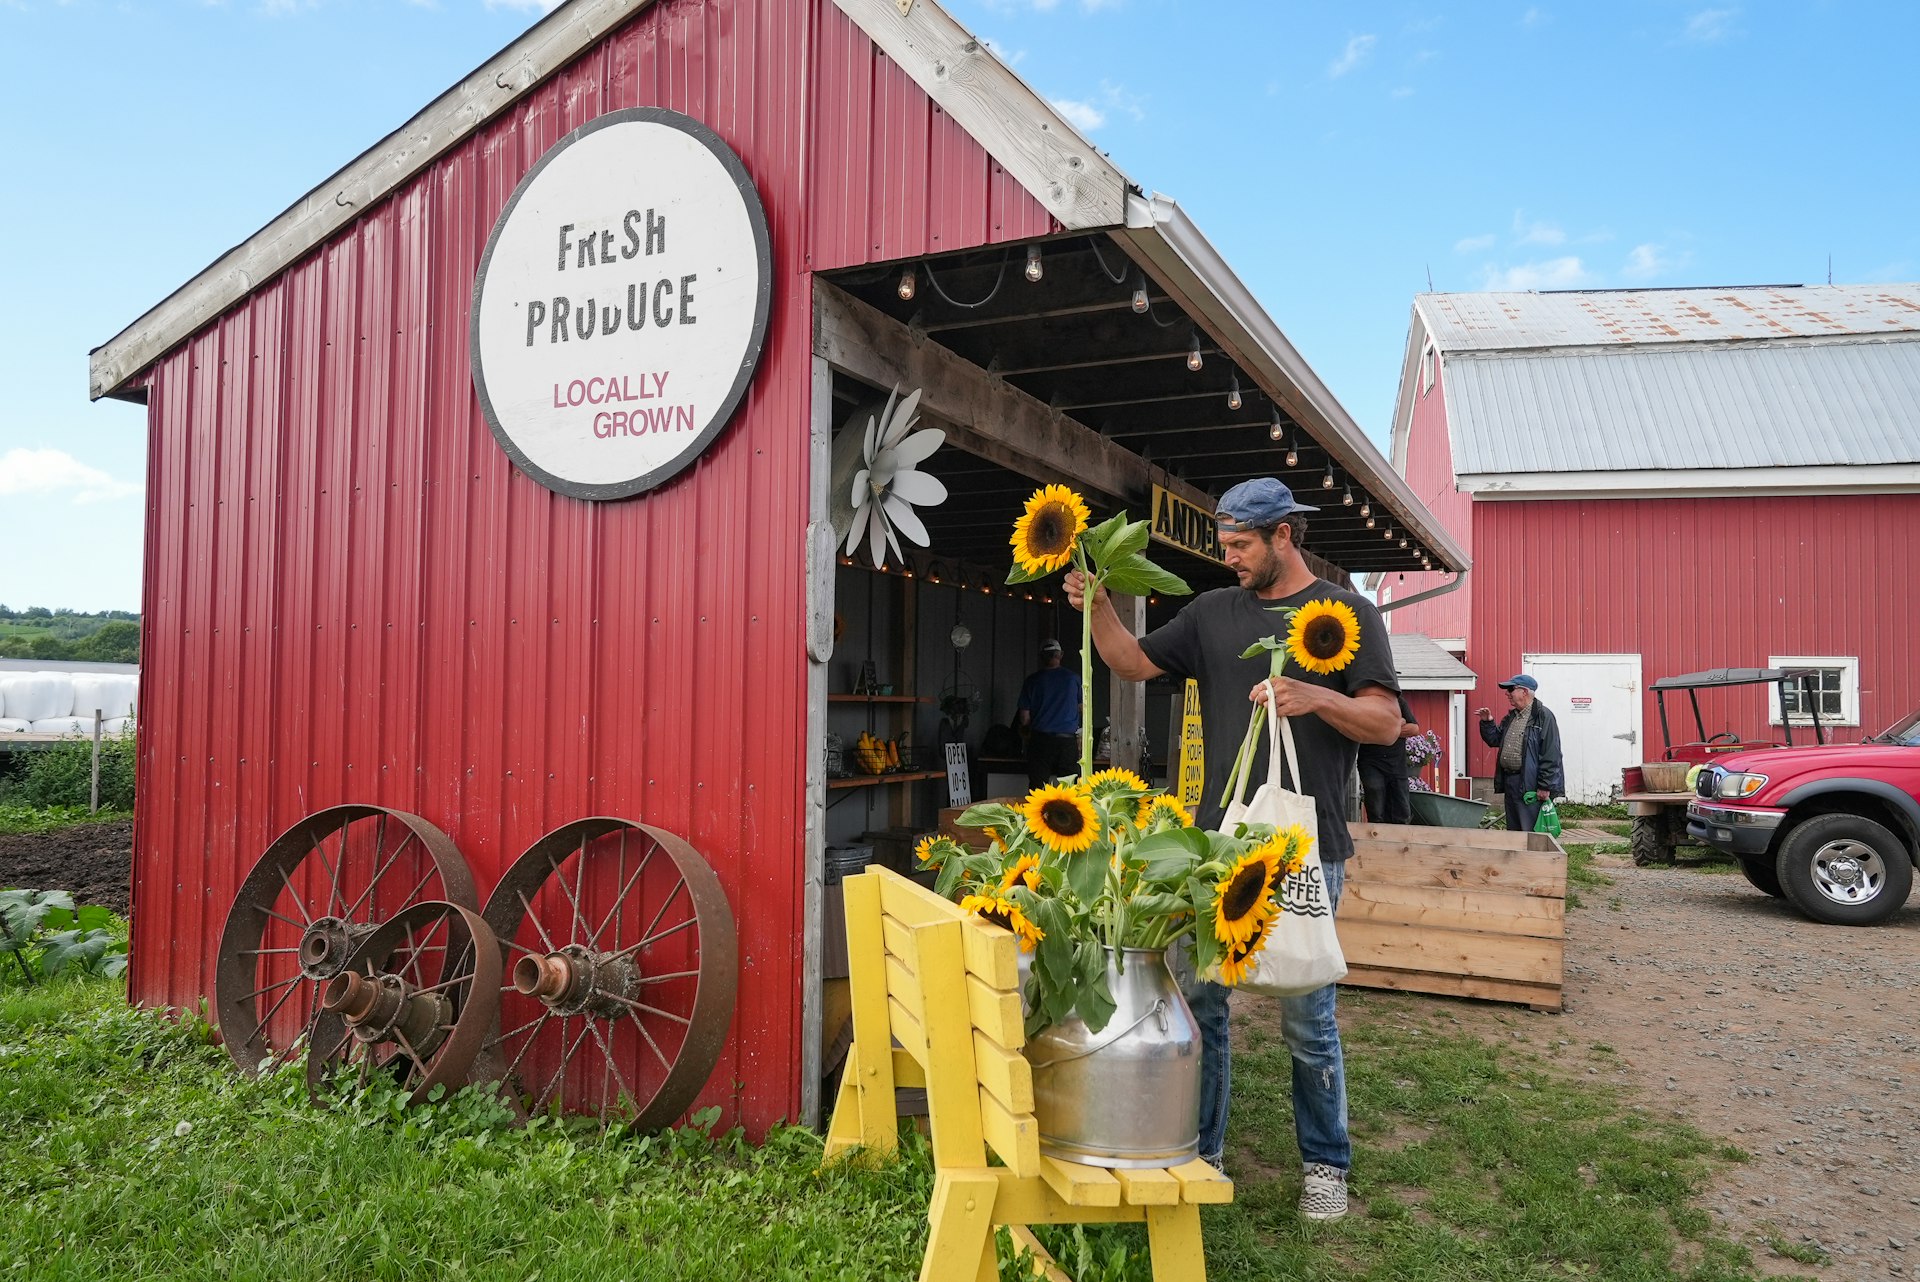 A man buys sunflowers from a roadside farm stall